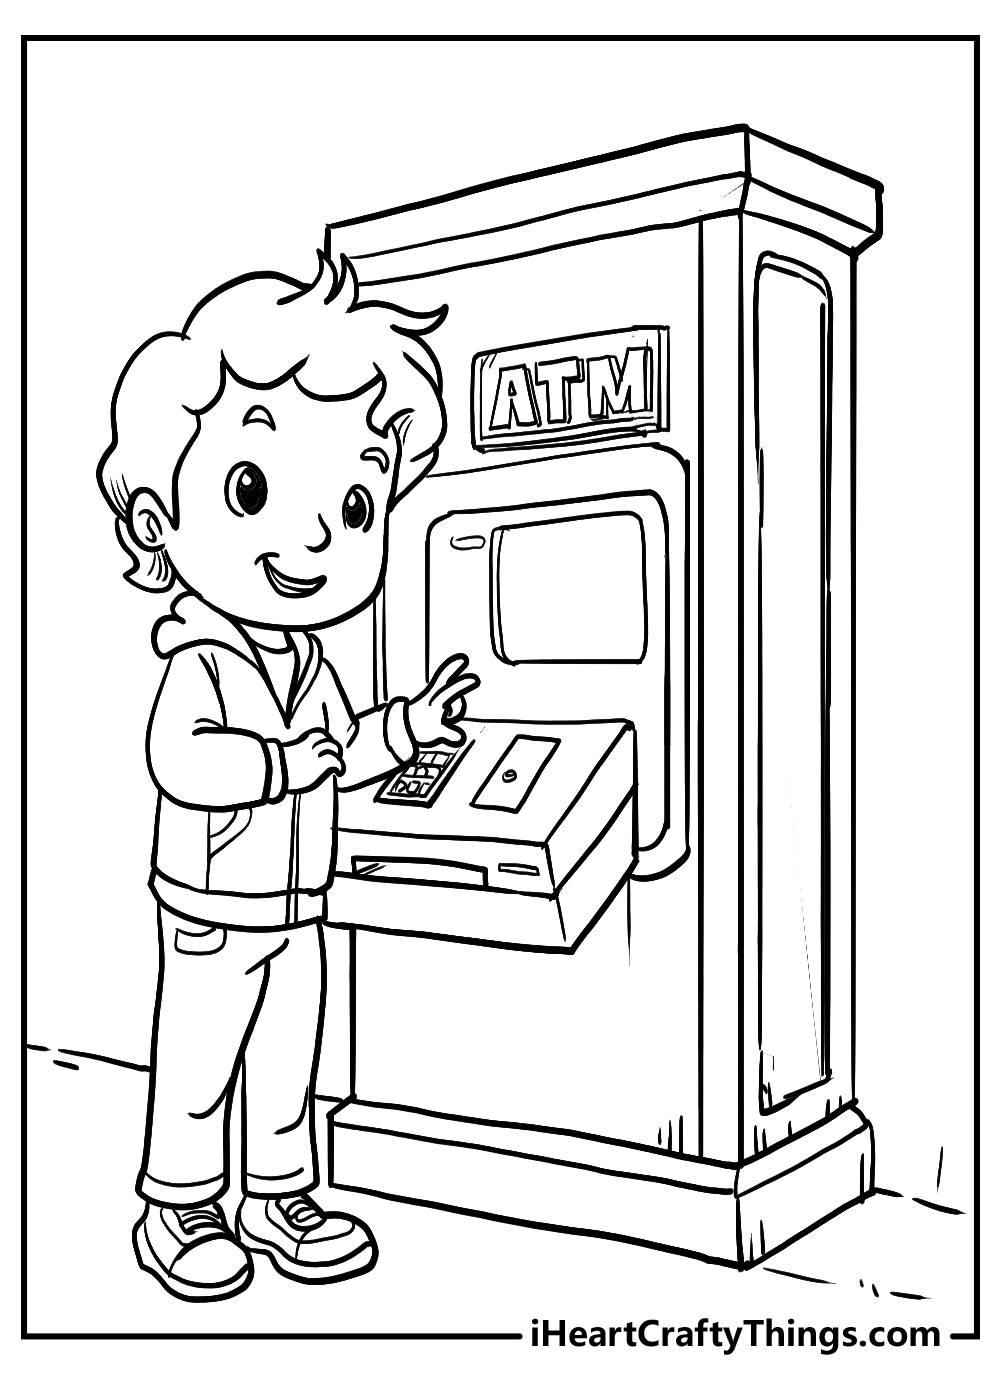 ATM coloring pages